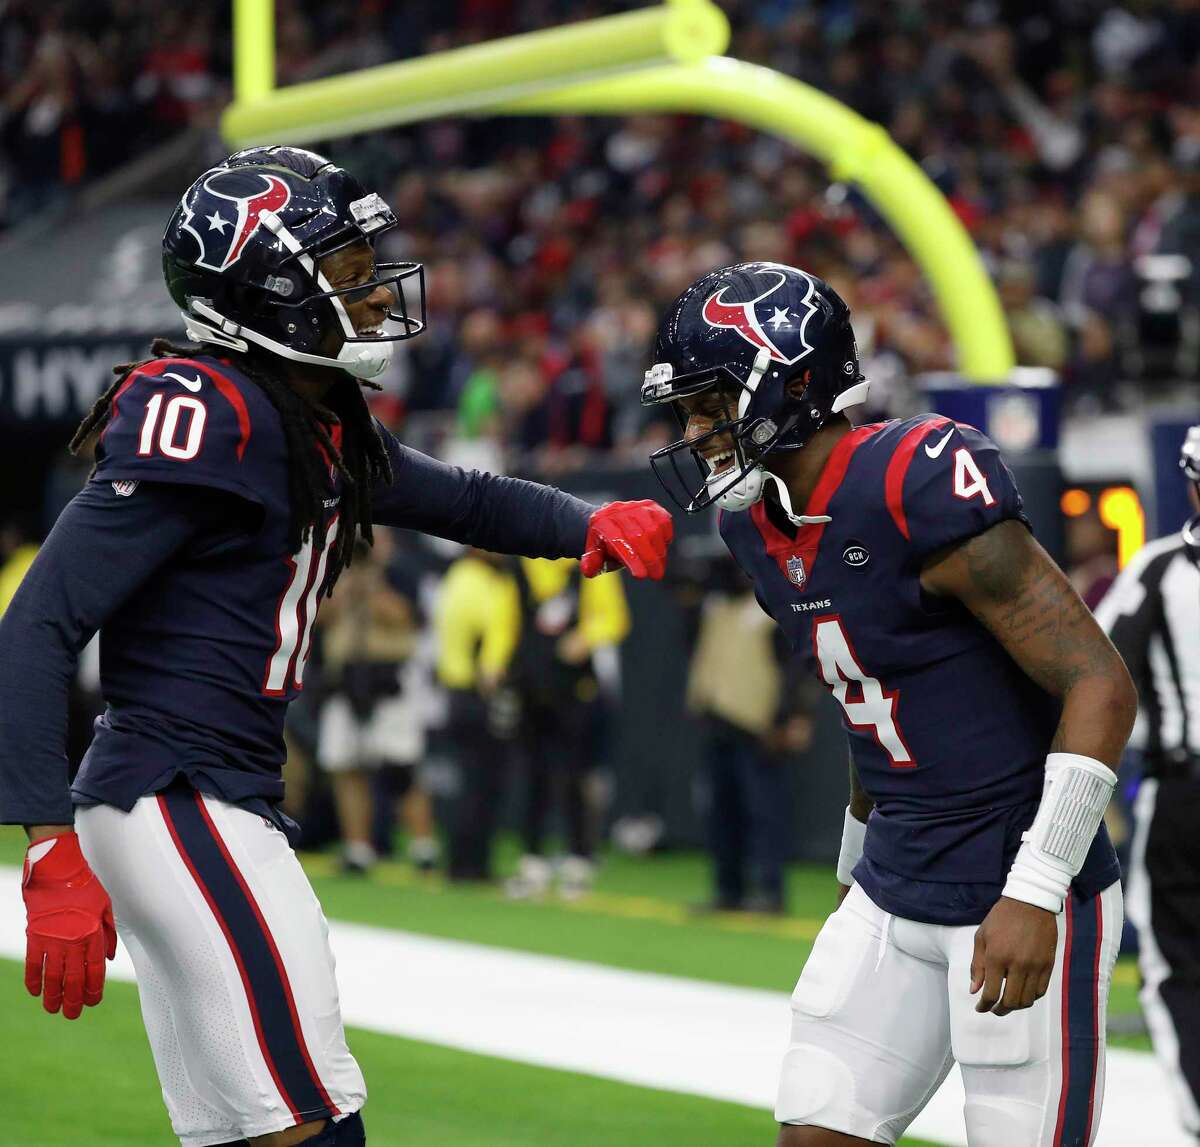 Houston Texans quarterback Deshaun Watson (4) celebrates with wide receiver DeAndre Hopkins (10) after Watson's touchdown during the second quarter of an NFL football game at NRG Stadium, Sunday, Dec. 30, 2018, in Houston.